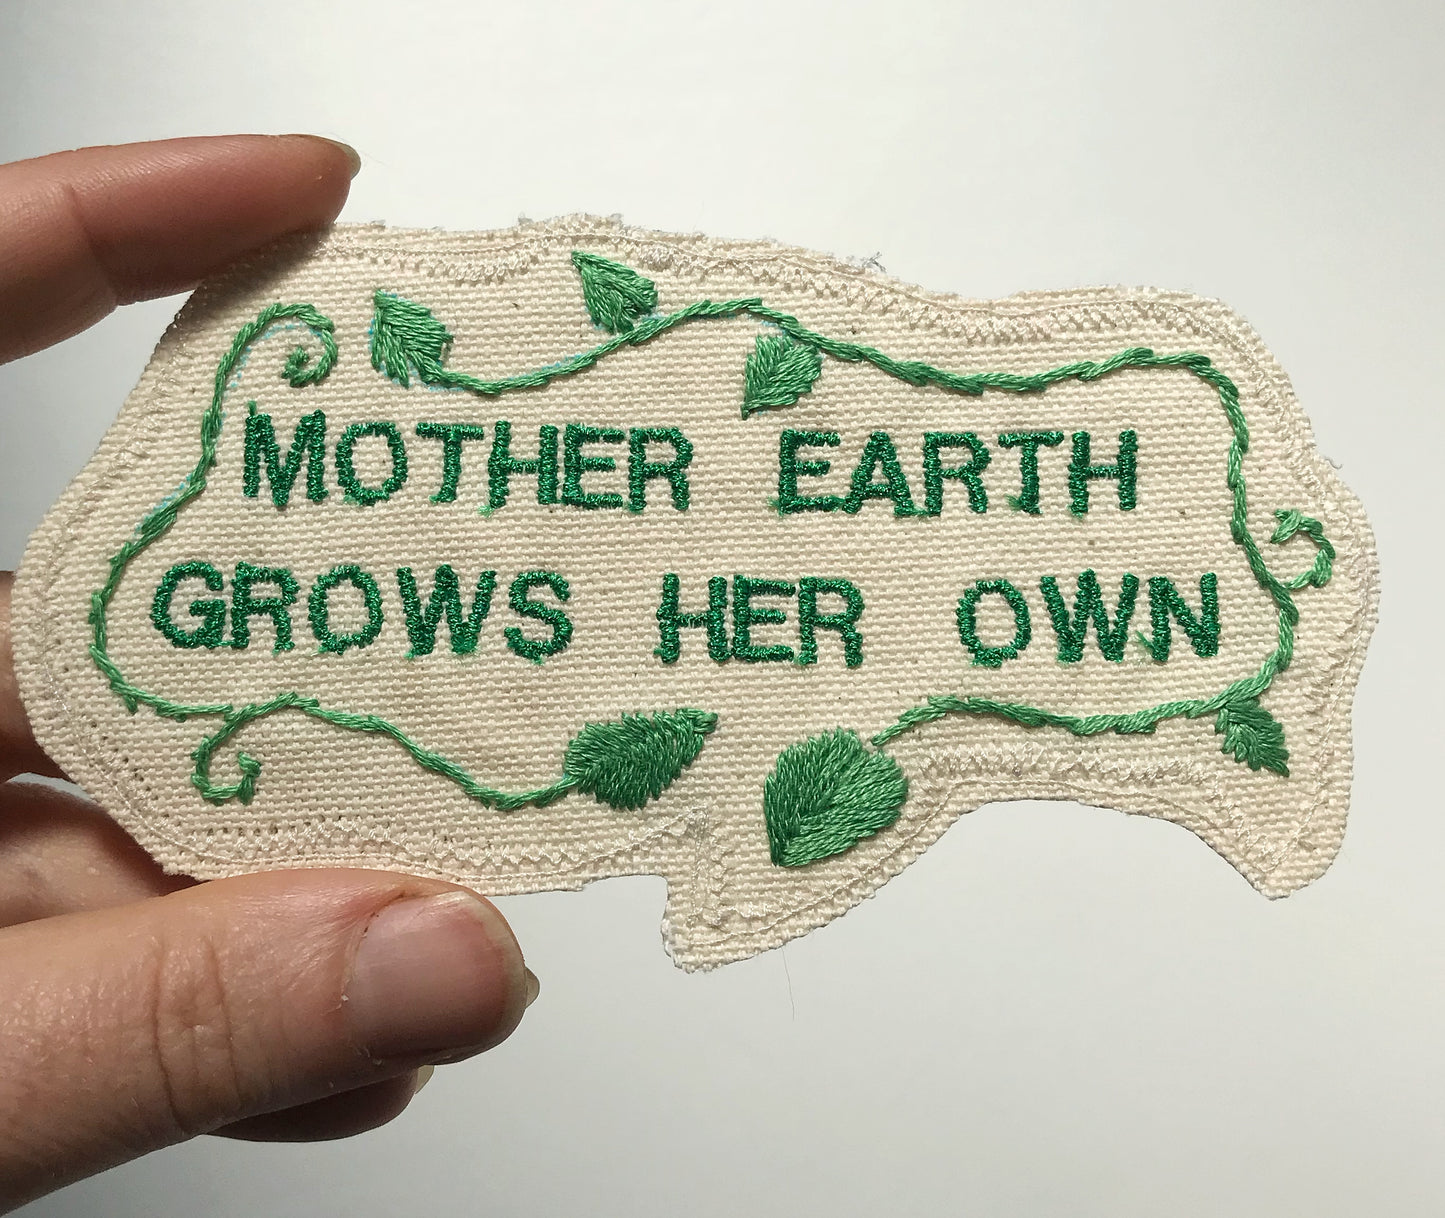 Mother Earth Grows Her Own - Canvas Embroidered Patch. One of a kind